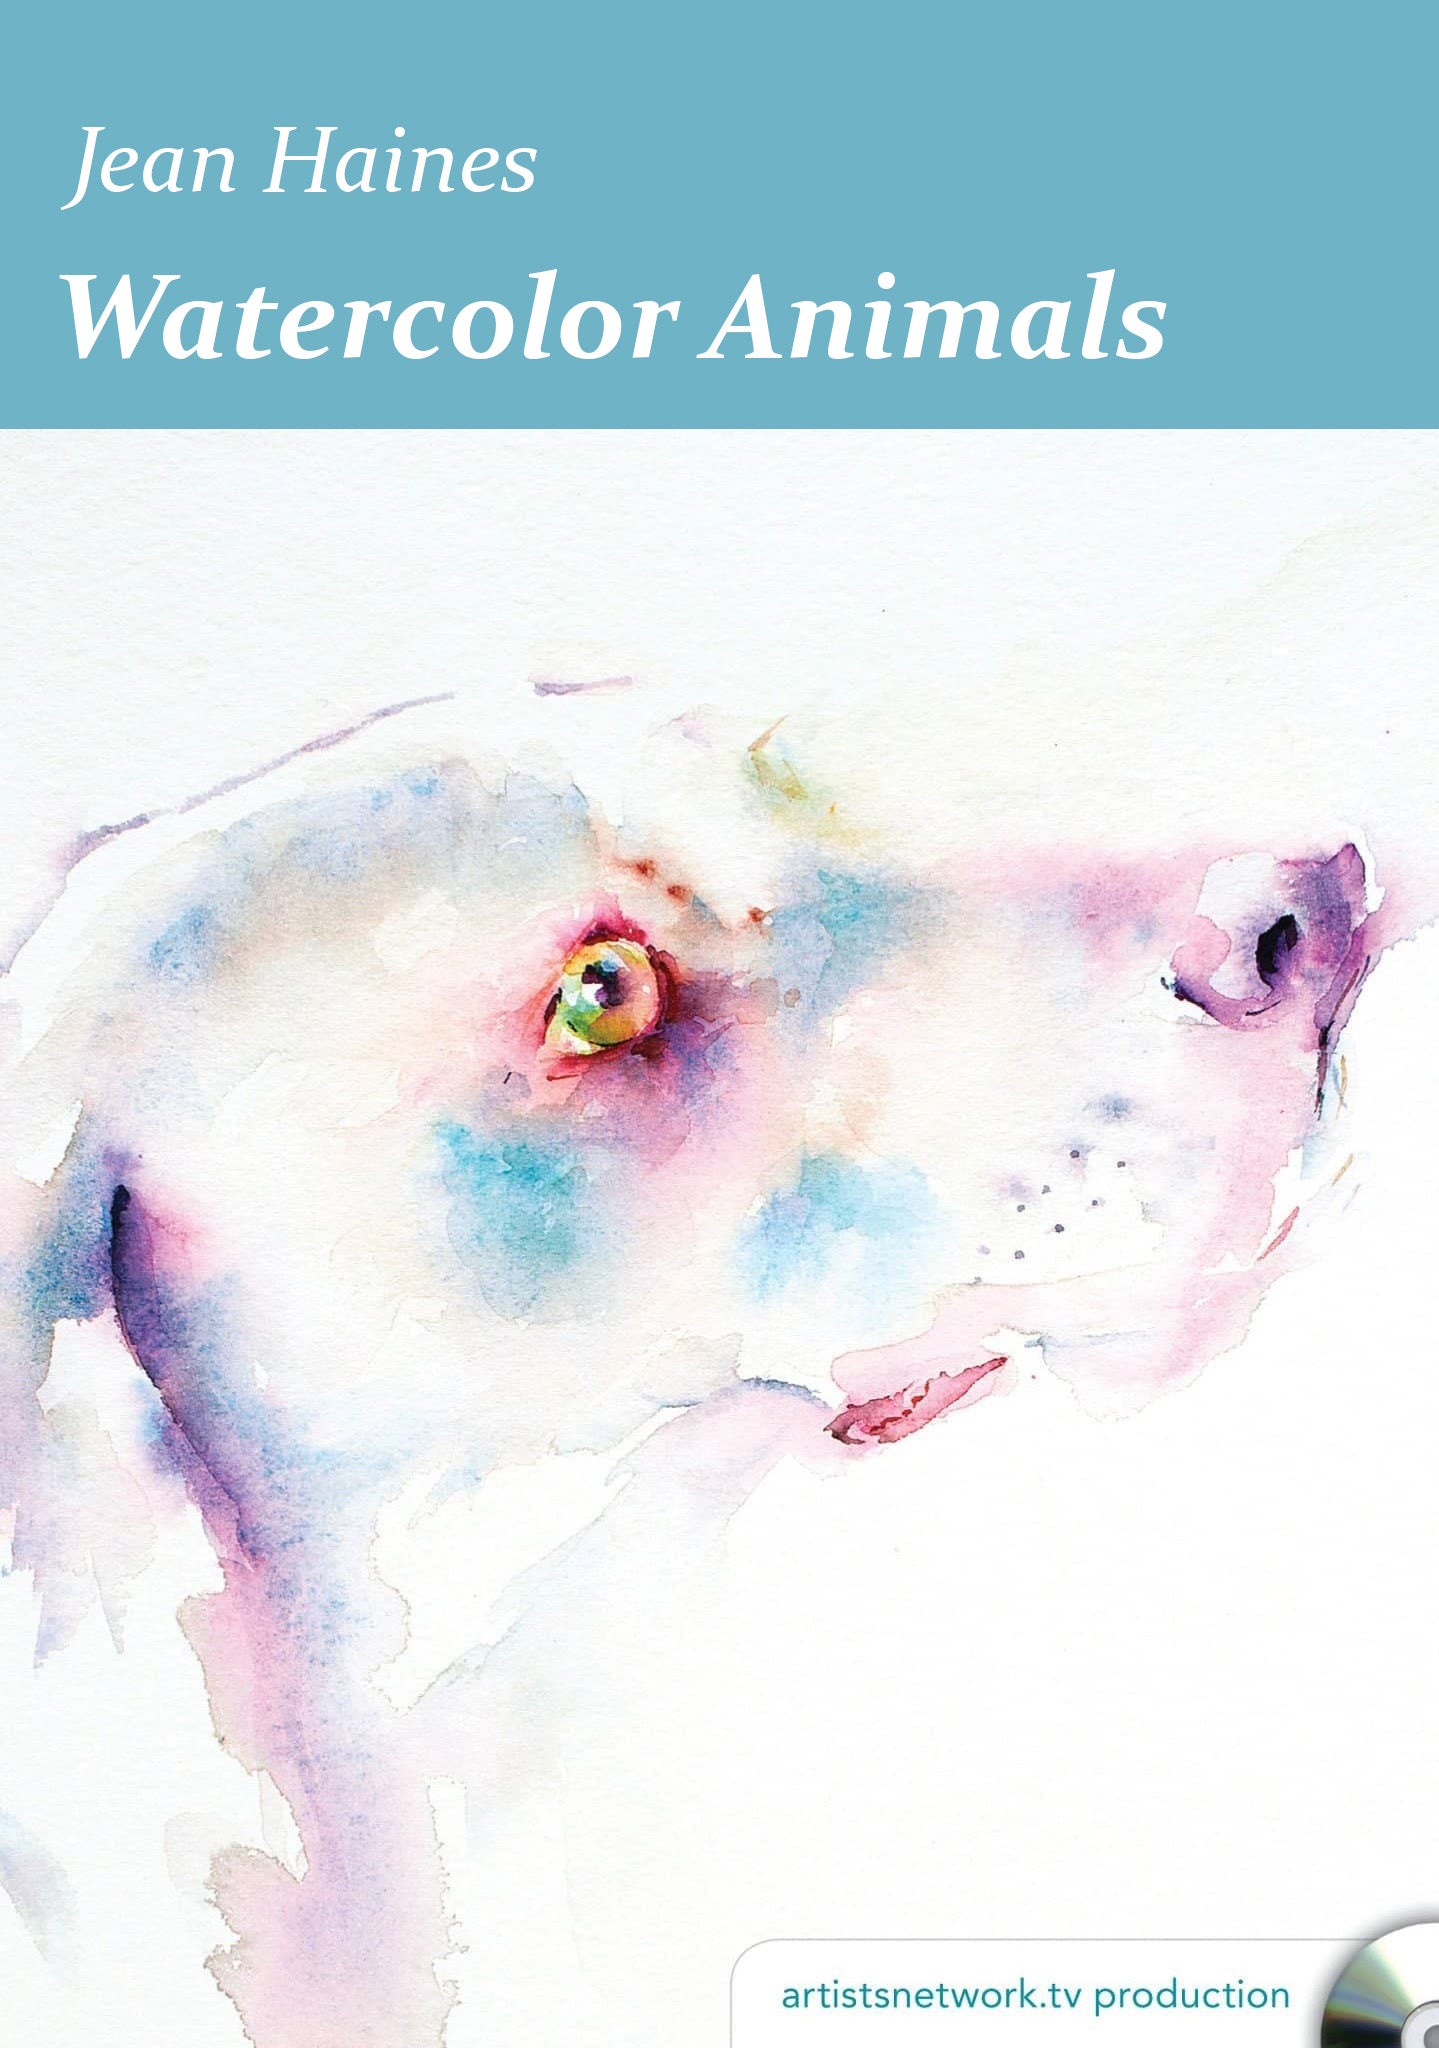 Jean Haines: Watercolor Animals